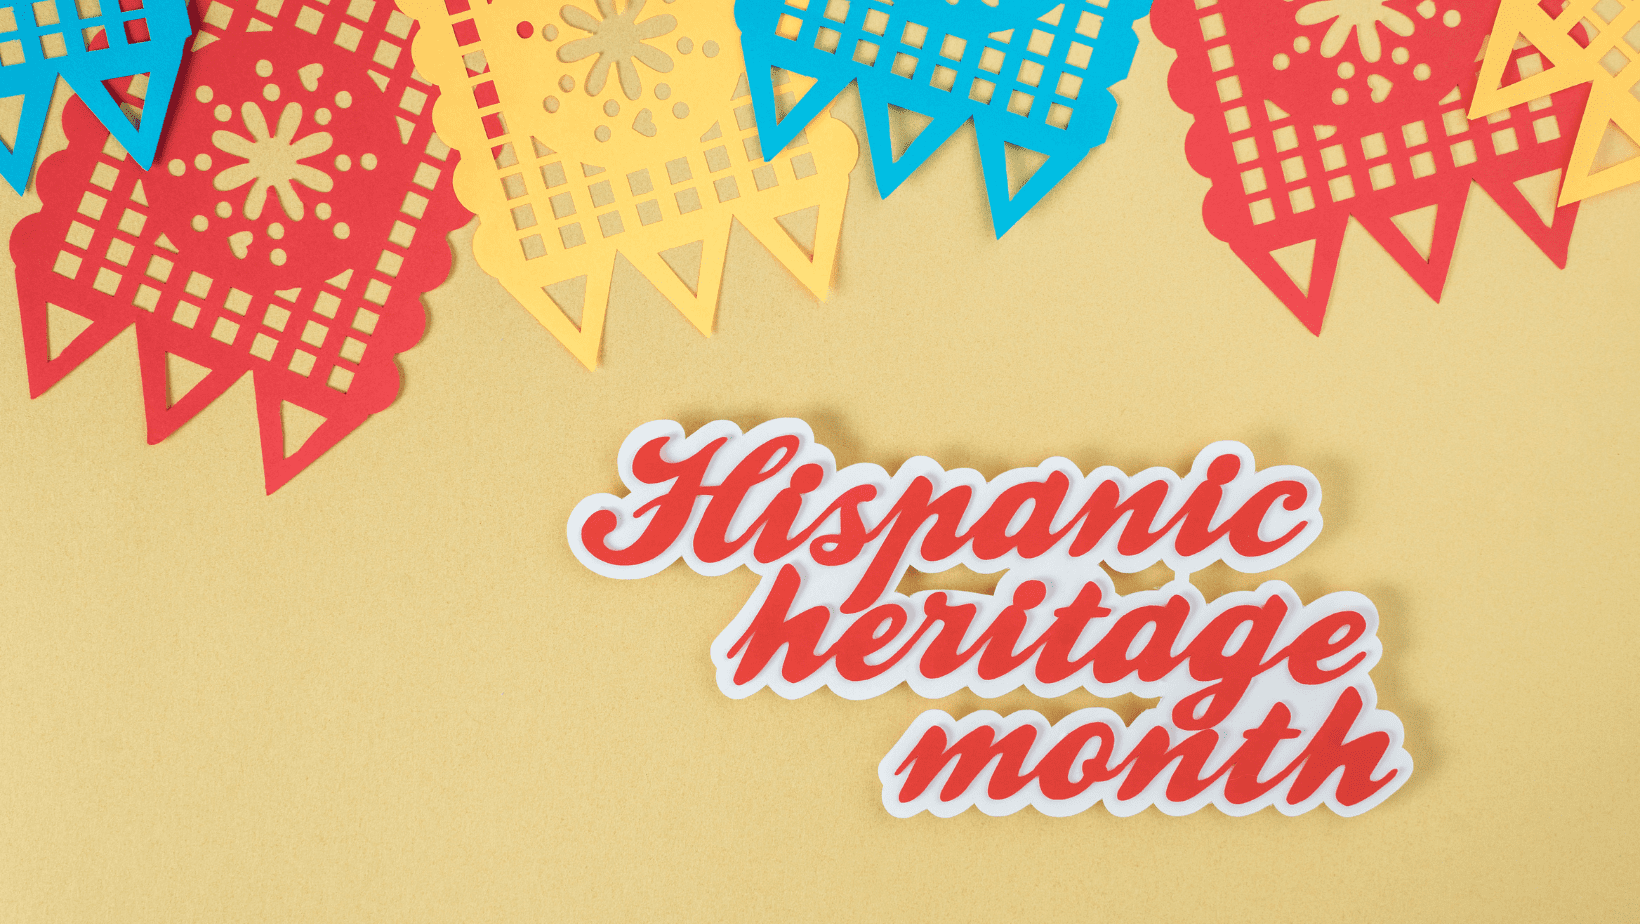 Hispanic Heritage Month text on tan background with flags